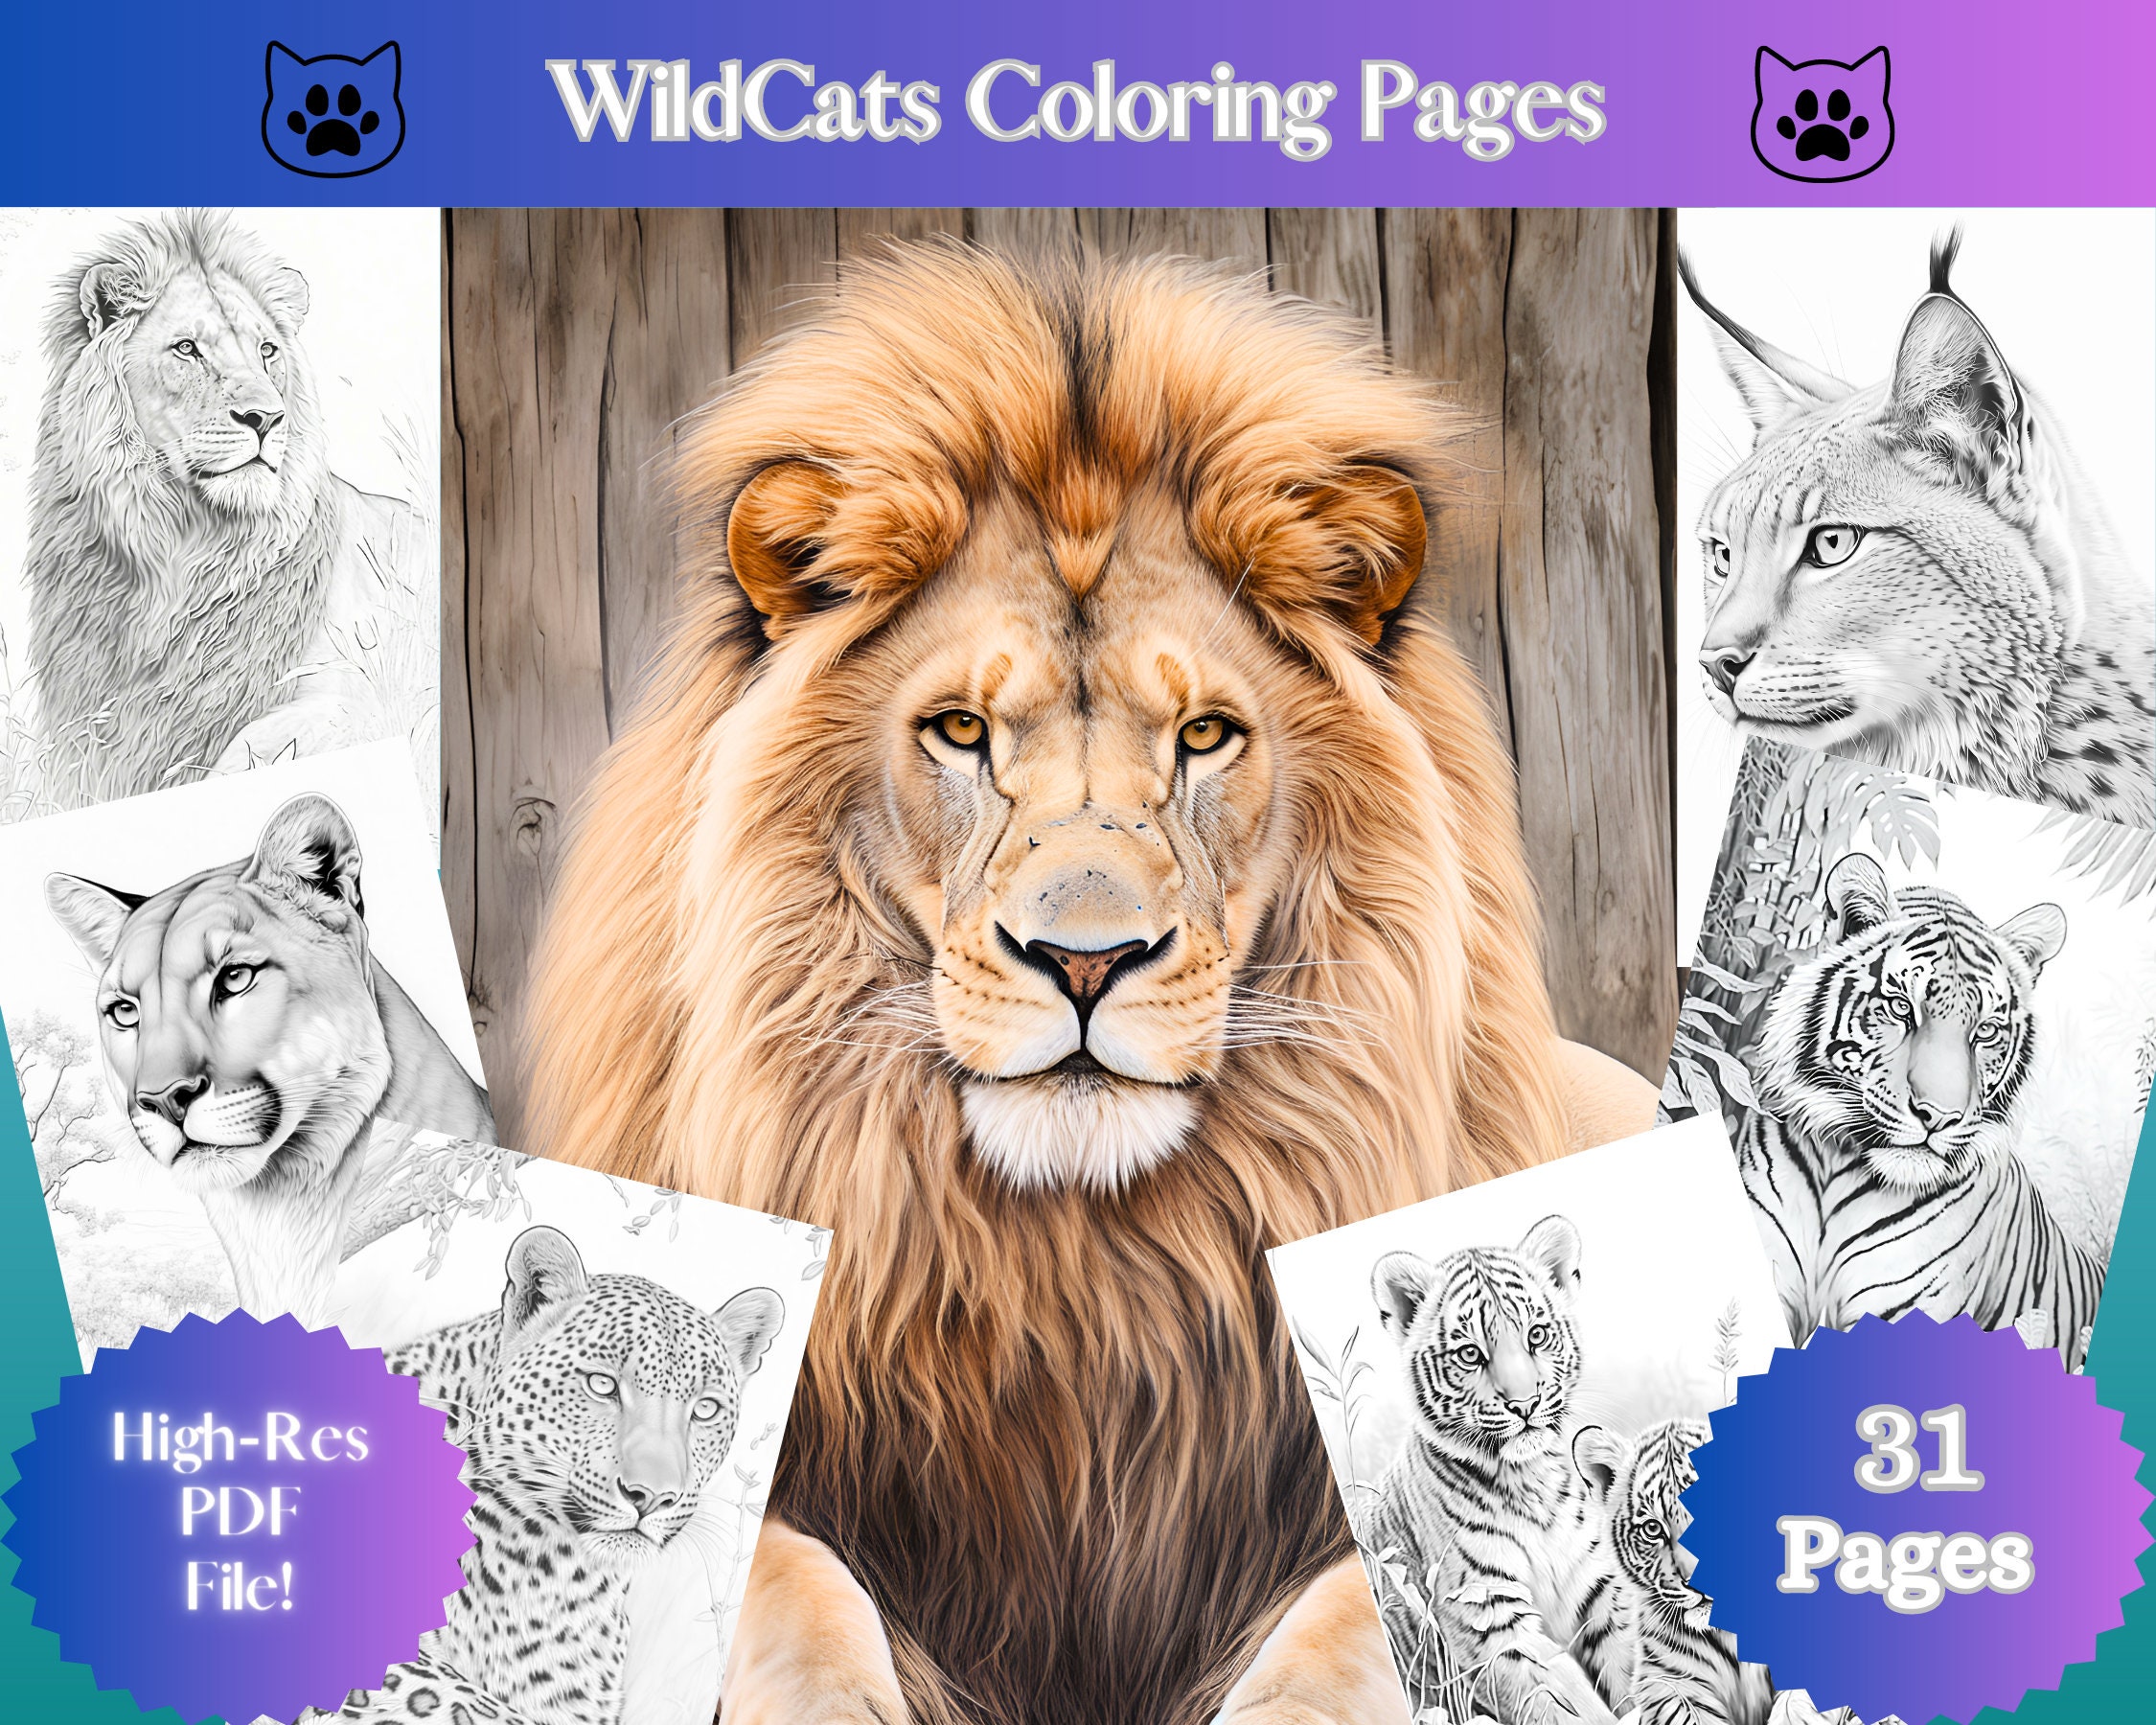 New Adult Coloring Book 100 Animals: 100 Stress Relieving Animal Designs  with Lions, dragons, butterfly, Elephants, Owls, Horses, Dogs, Cats and  Tiger (Paperback)